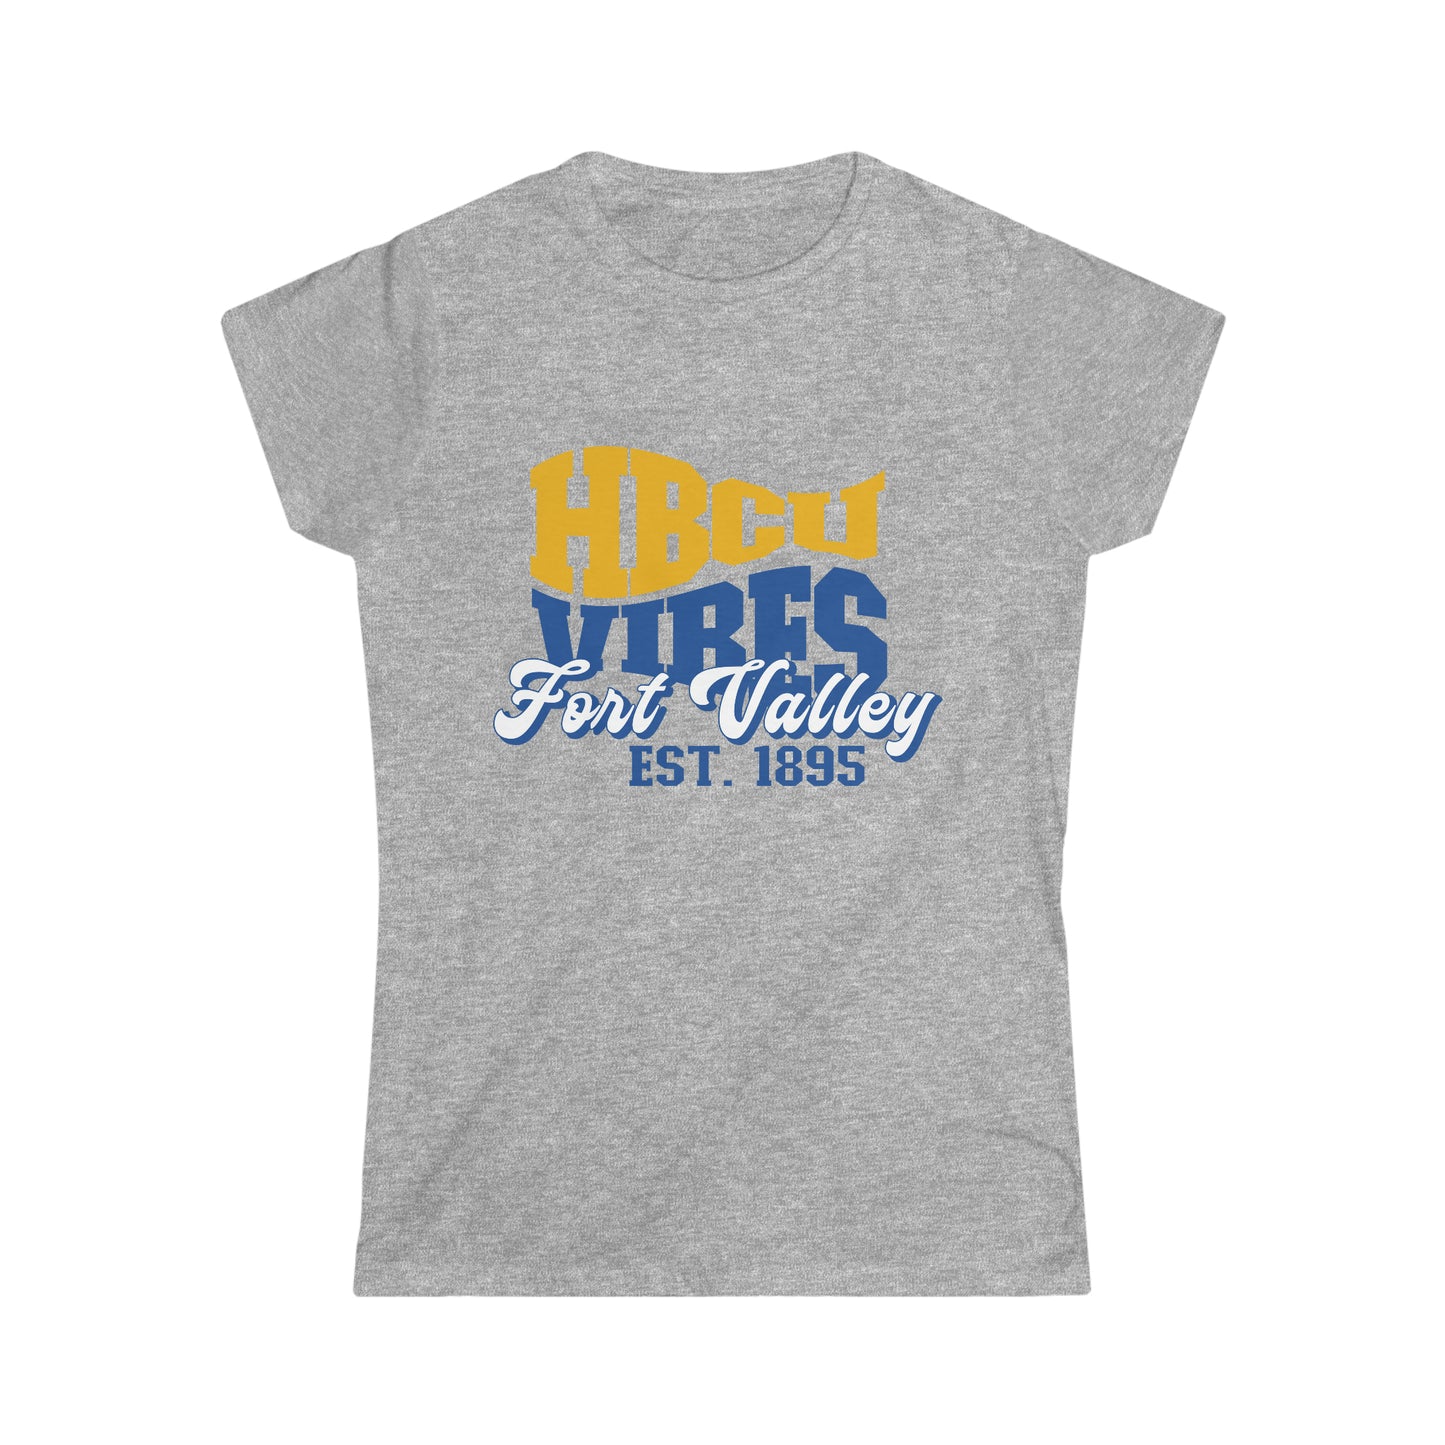 HBCU Love (Fort Valley State University HBCU Vibes/ Women's Softstyle Tee)